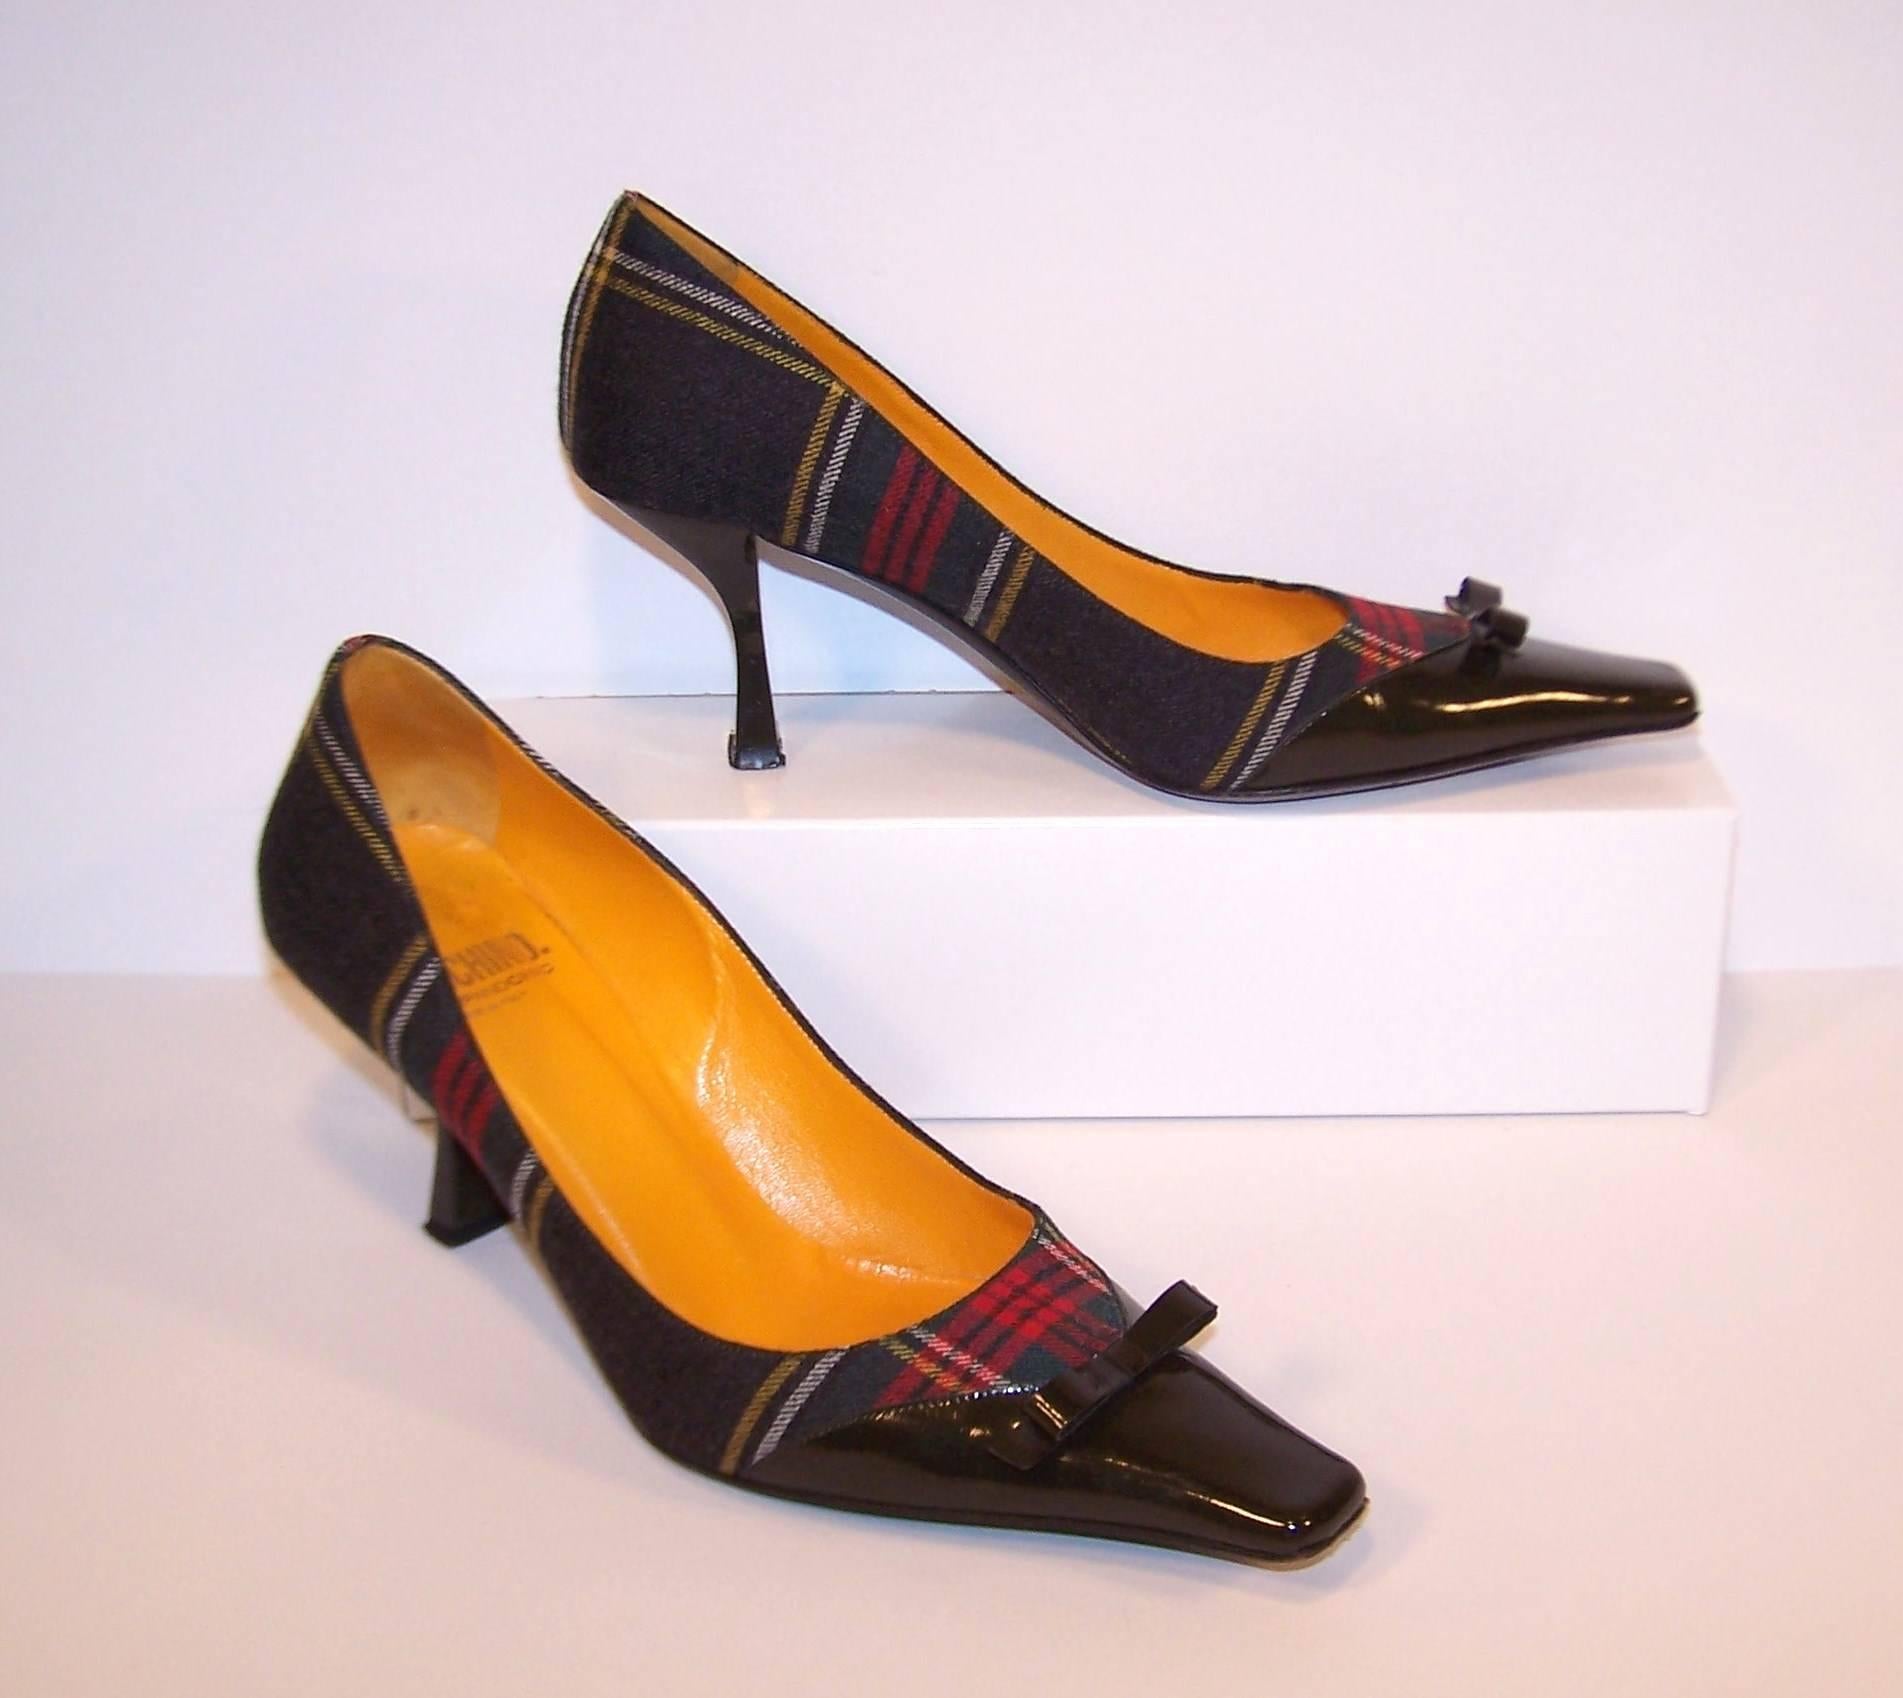 We're mad for plaid and Moschino's Cheap & Chic wool pumps fit the bill!  The body of the shoe is a charcoal gray wool plaid with red, white and yellow highlights.  The snubbed nose pointy toes and stylized 3" heels are a gray-brown patent